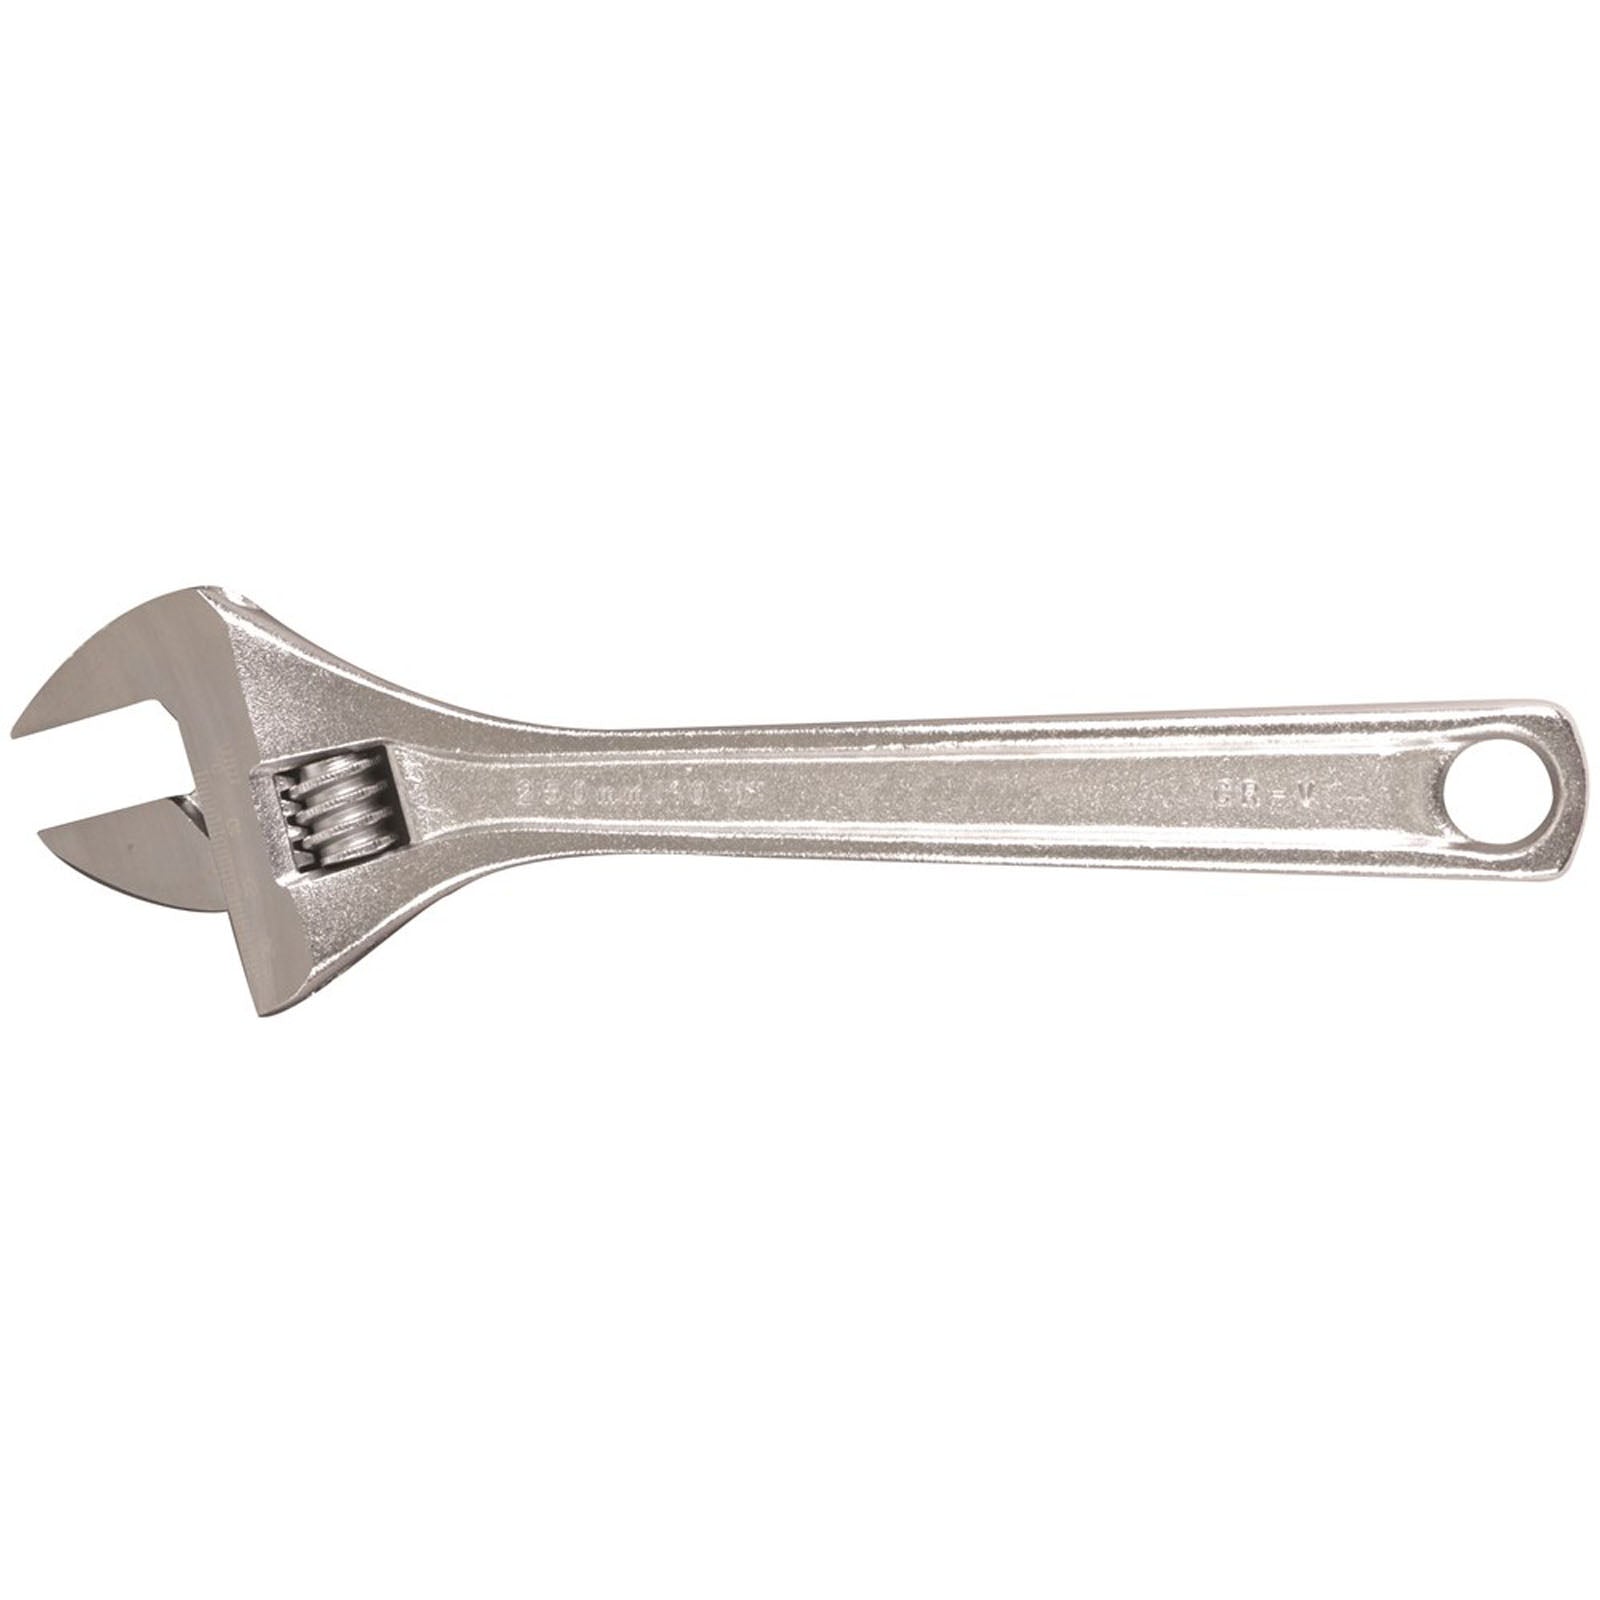 Adjustable Wrenches by Kincrome